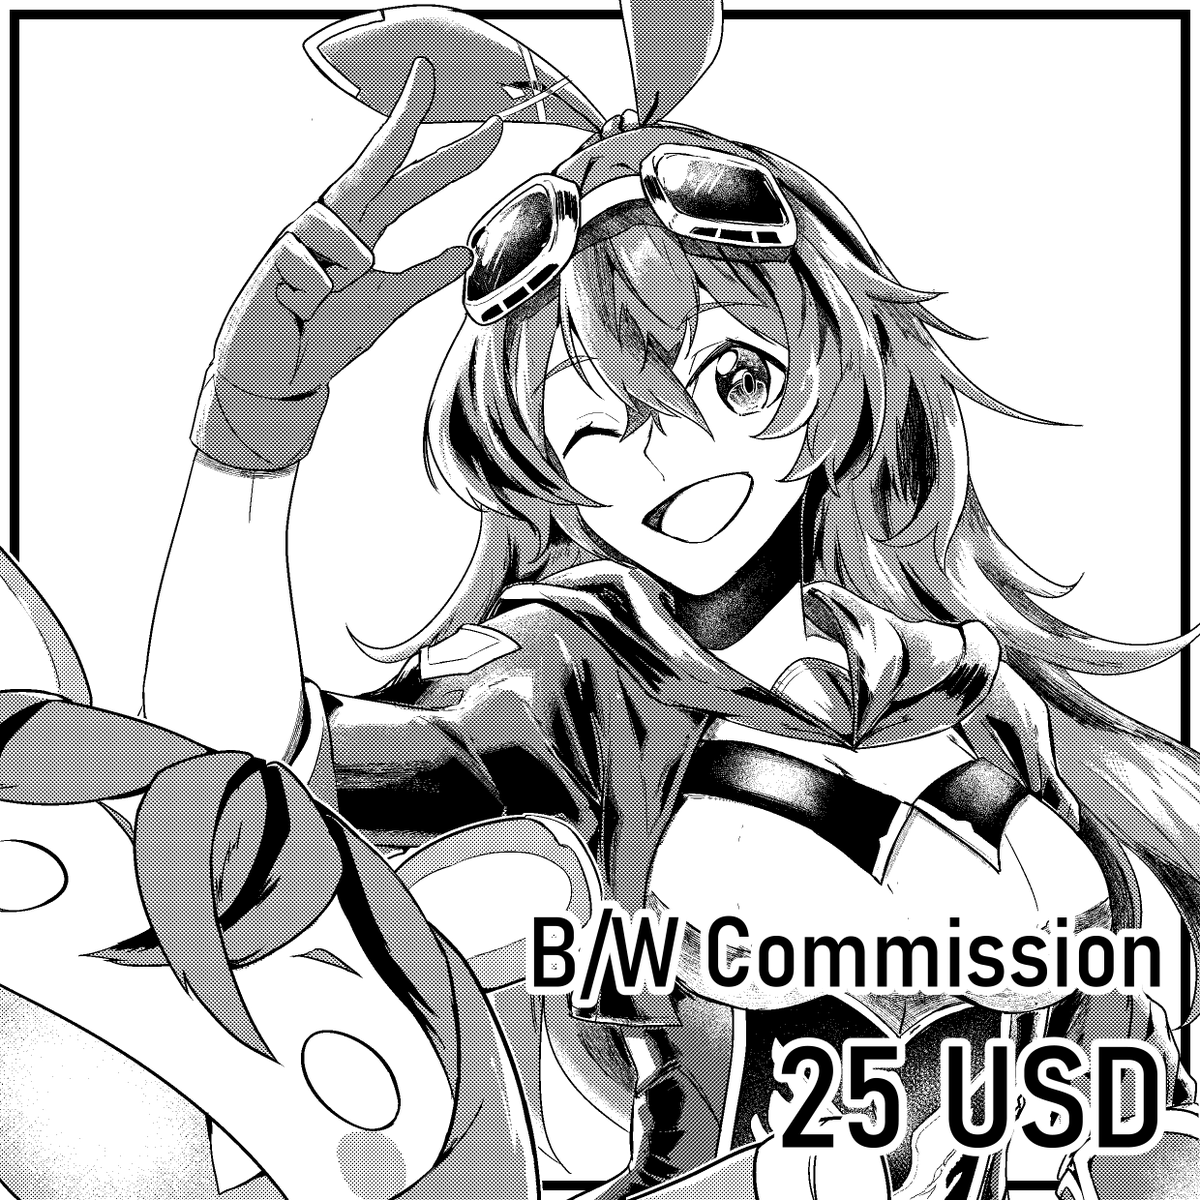 Opening BW commissions until I had enough slots to help my mom regain what's lost because she's just been scammed 

Work will be a lot longer than expected too, but I'll try to finish the comms in time

DMs are open, Boost and RTs are deeply appreciated, thank you! 